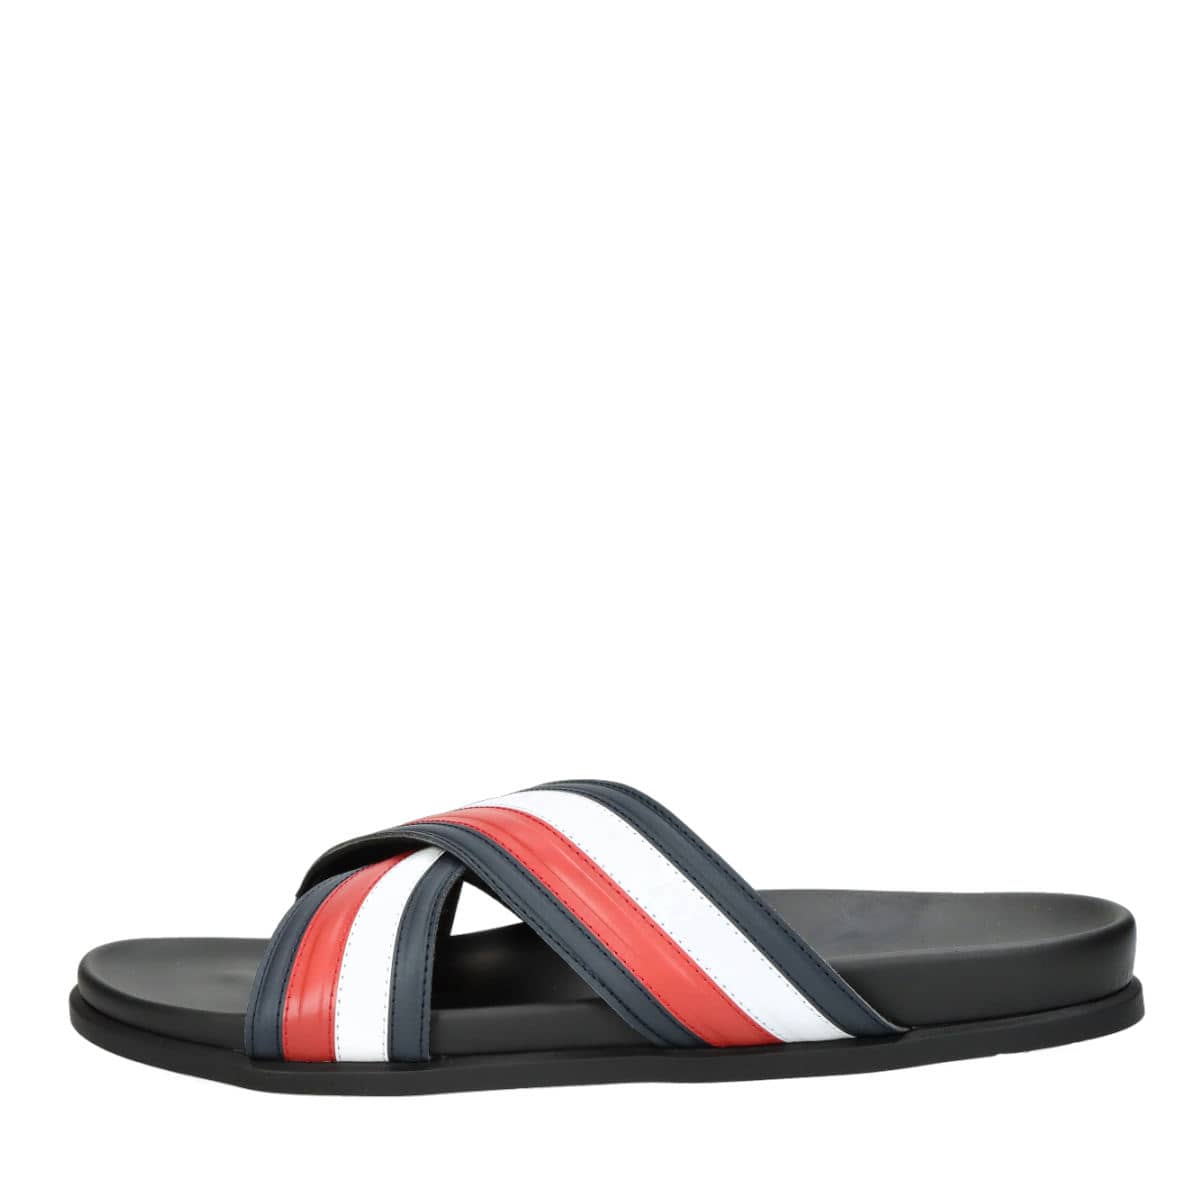 Palm Slippers For Men Round-Toe Flip Flops For Man Brands Casual